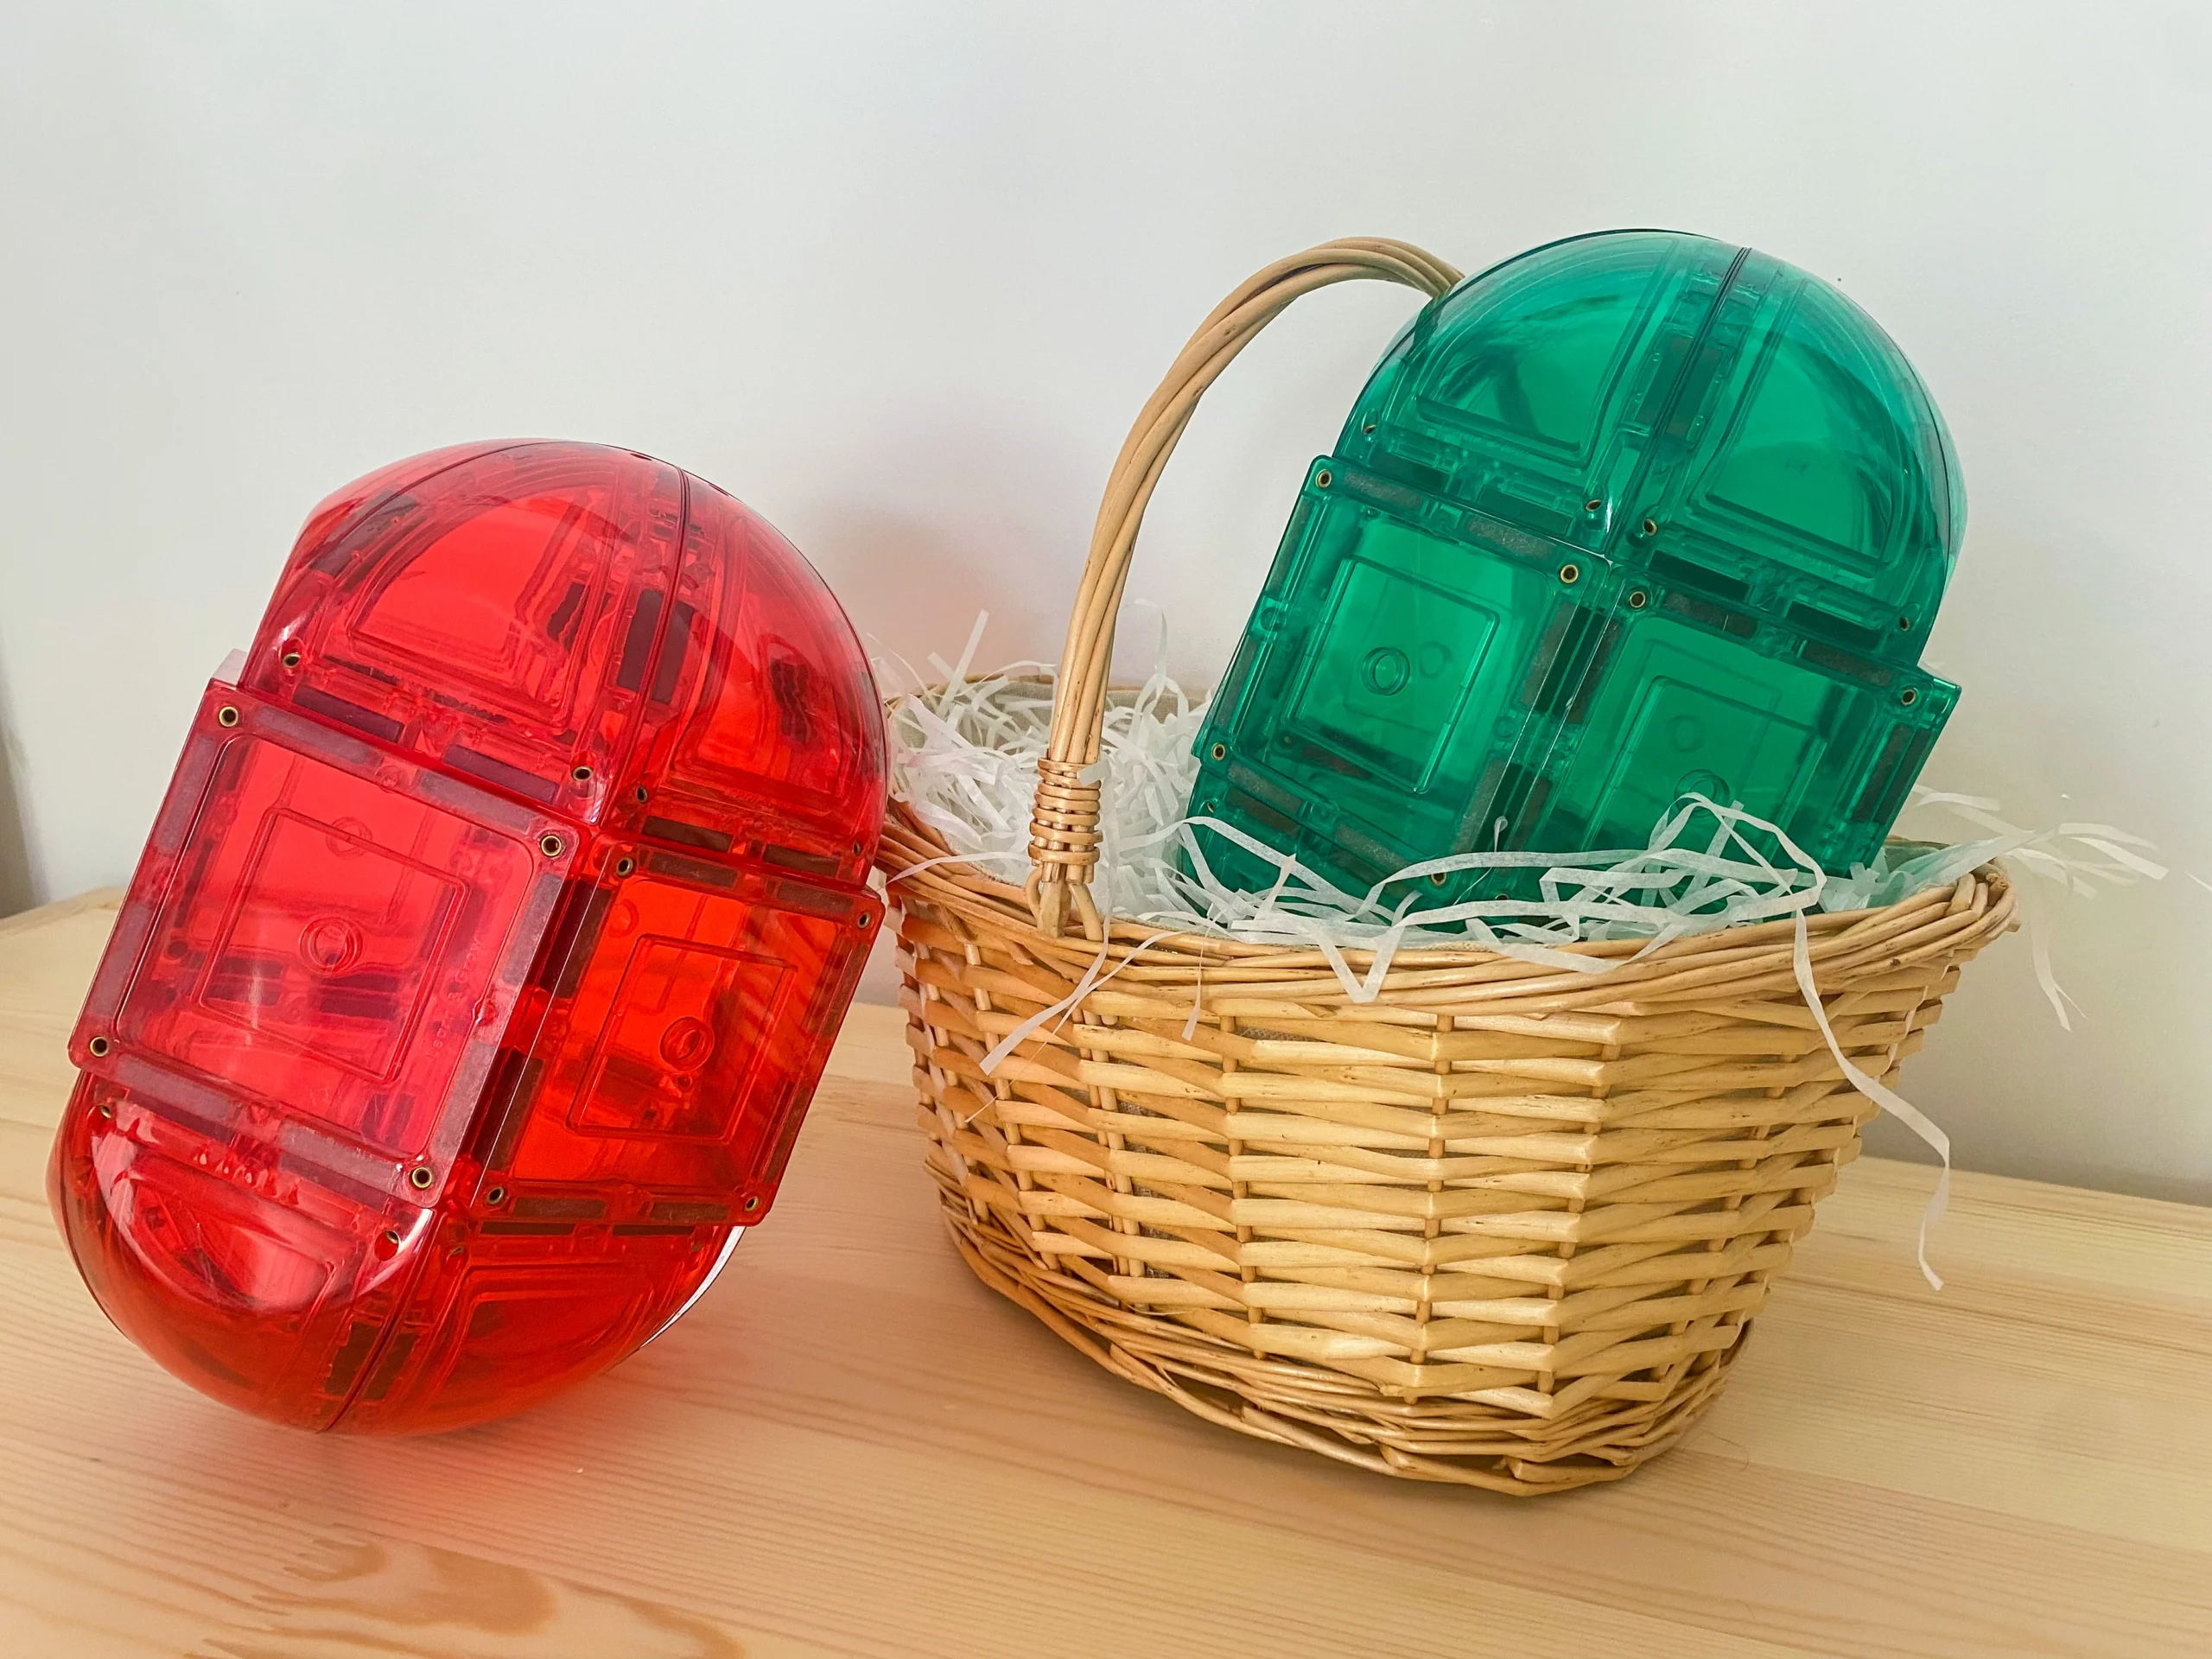 Easter eggs in red and green made from magnetic tiles